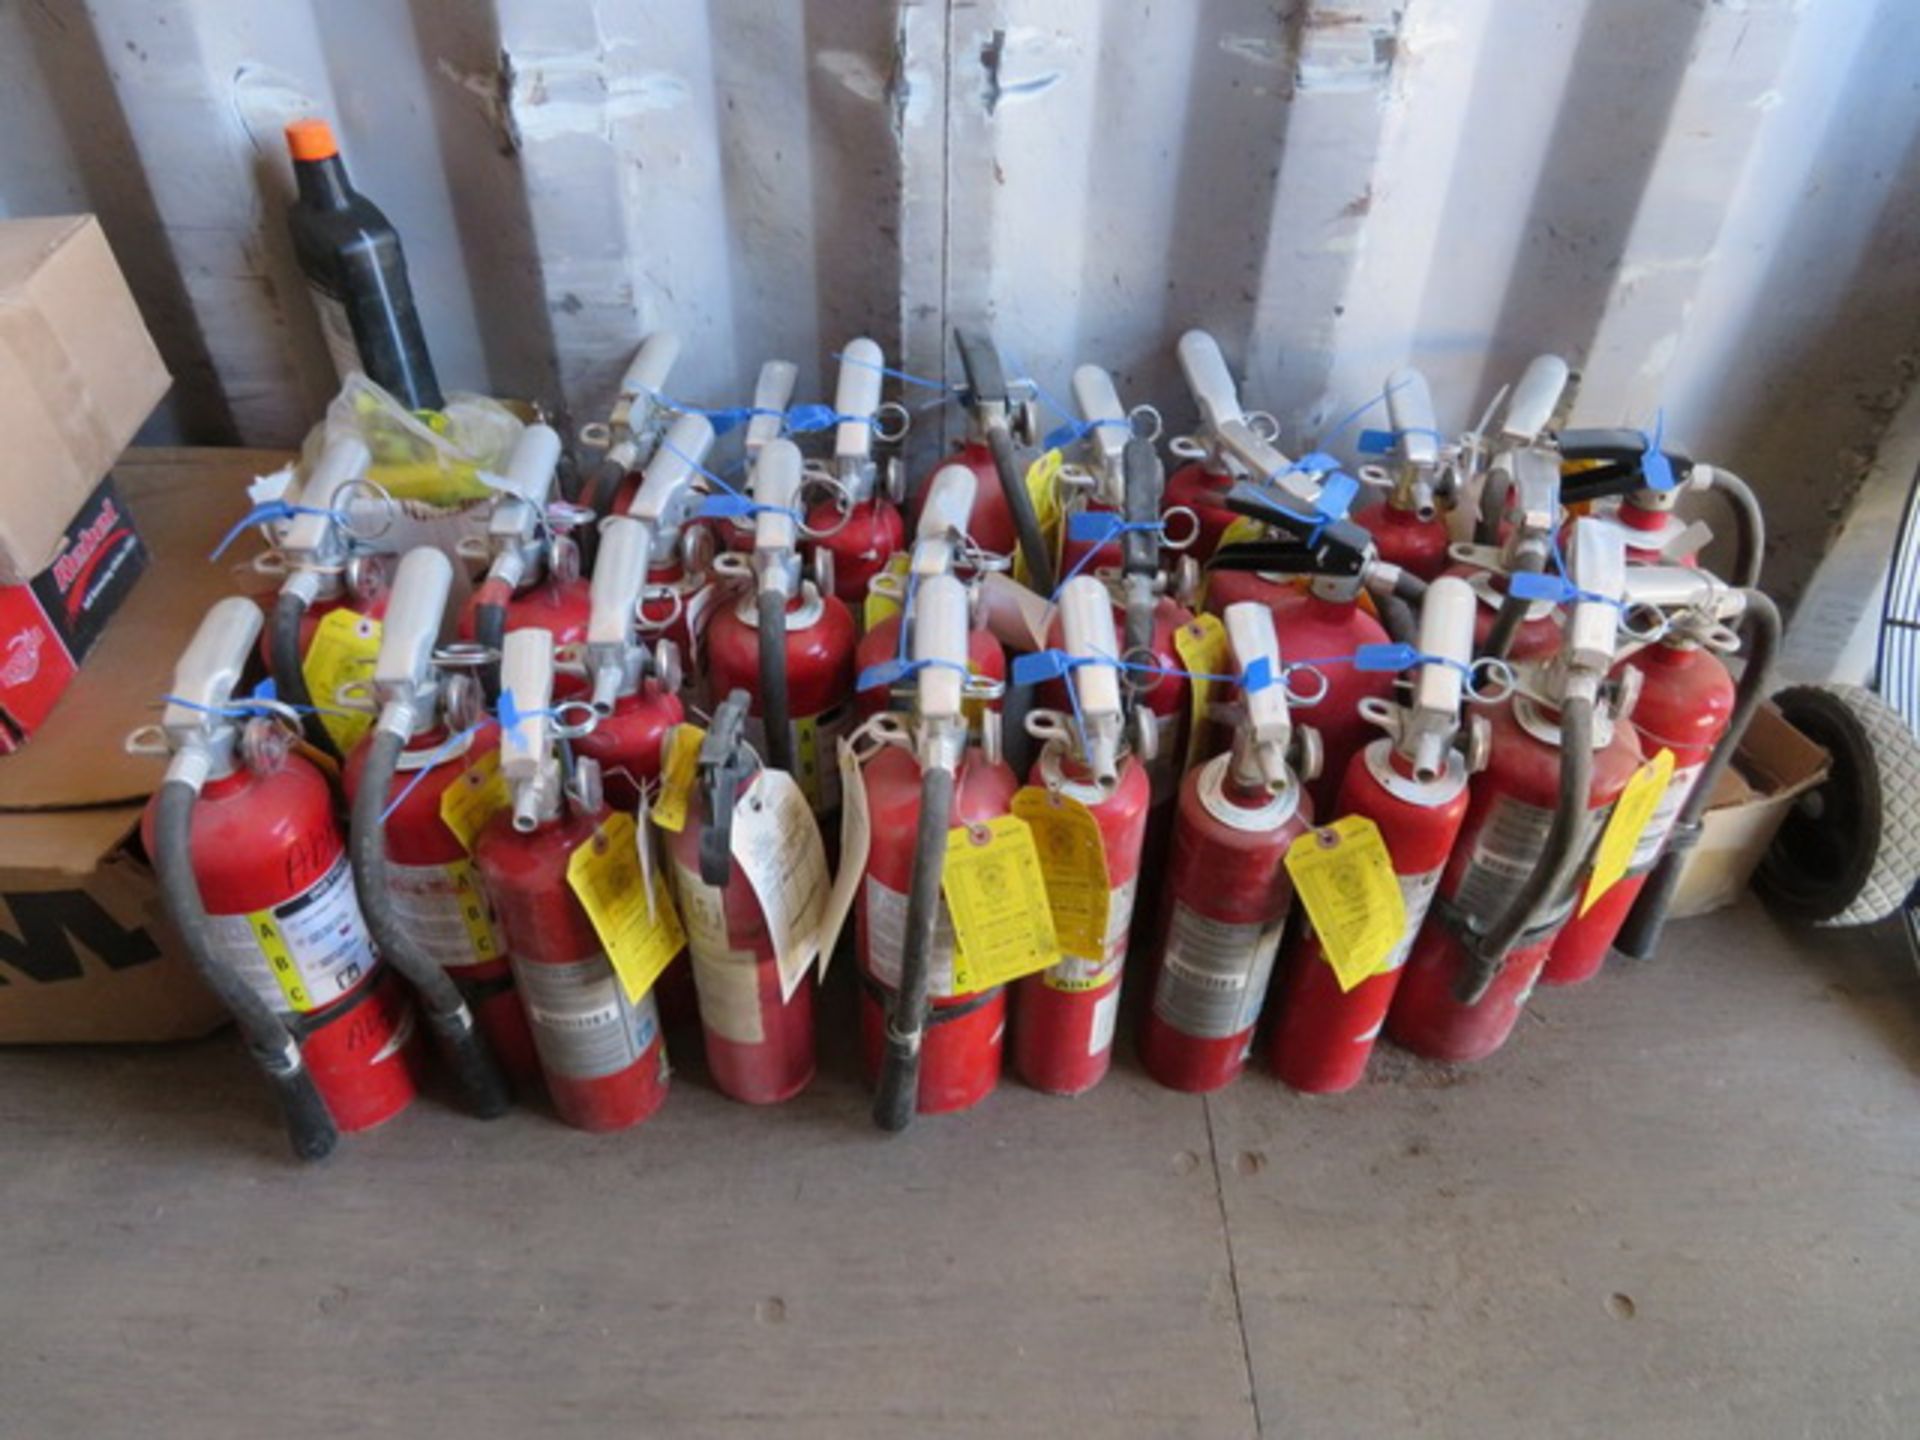 Contents of Shipping Container. To Include 1/2" PVDF Tubing, Safety Glasses, Safety Signs, - Image 51 of 51